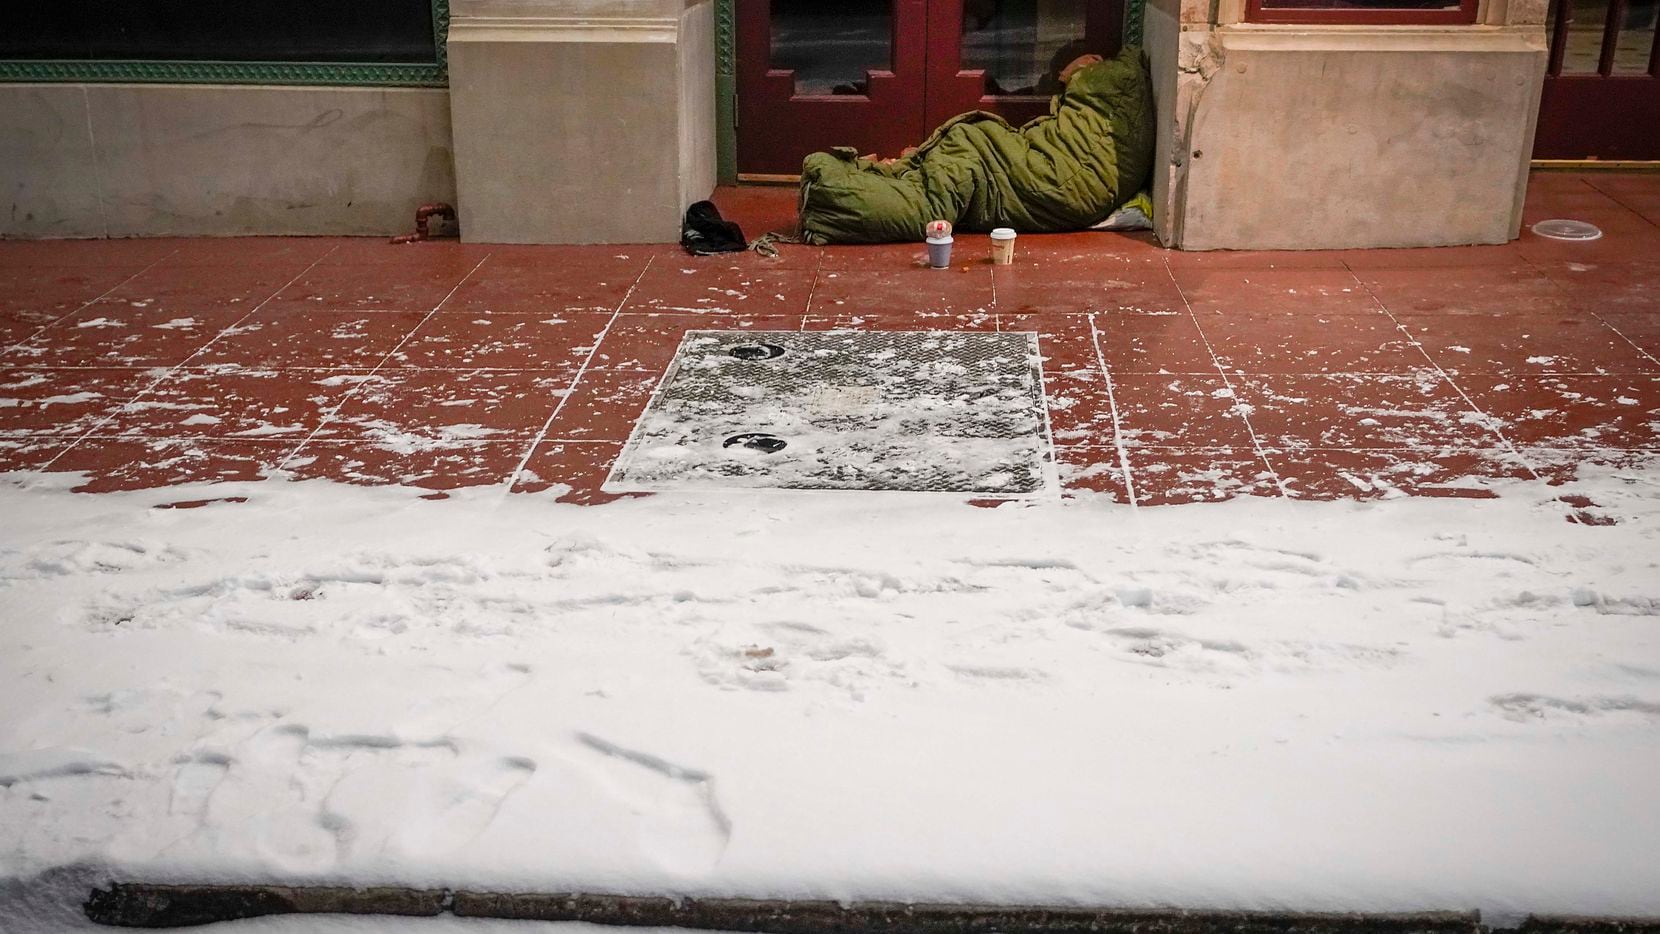 With temperatures in the single digits, a homeless person sleeps in the doorway of Dallas' Majestic Theater during a brutal winter storm on Feb. 14, 2021.